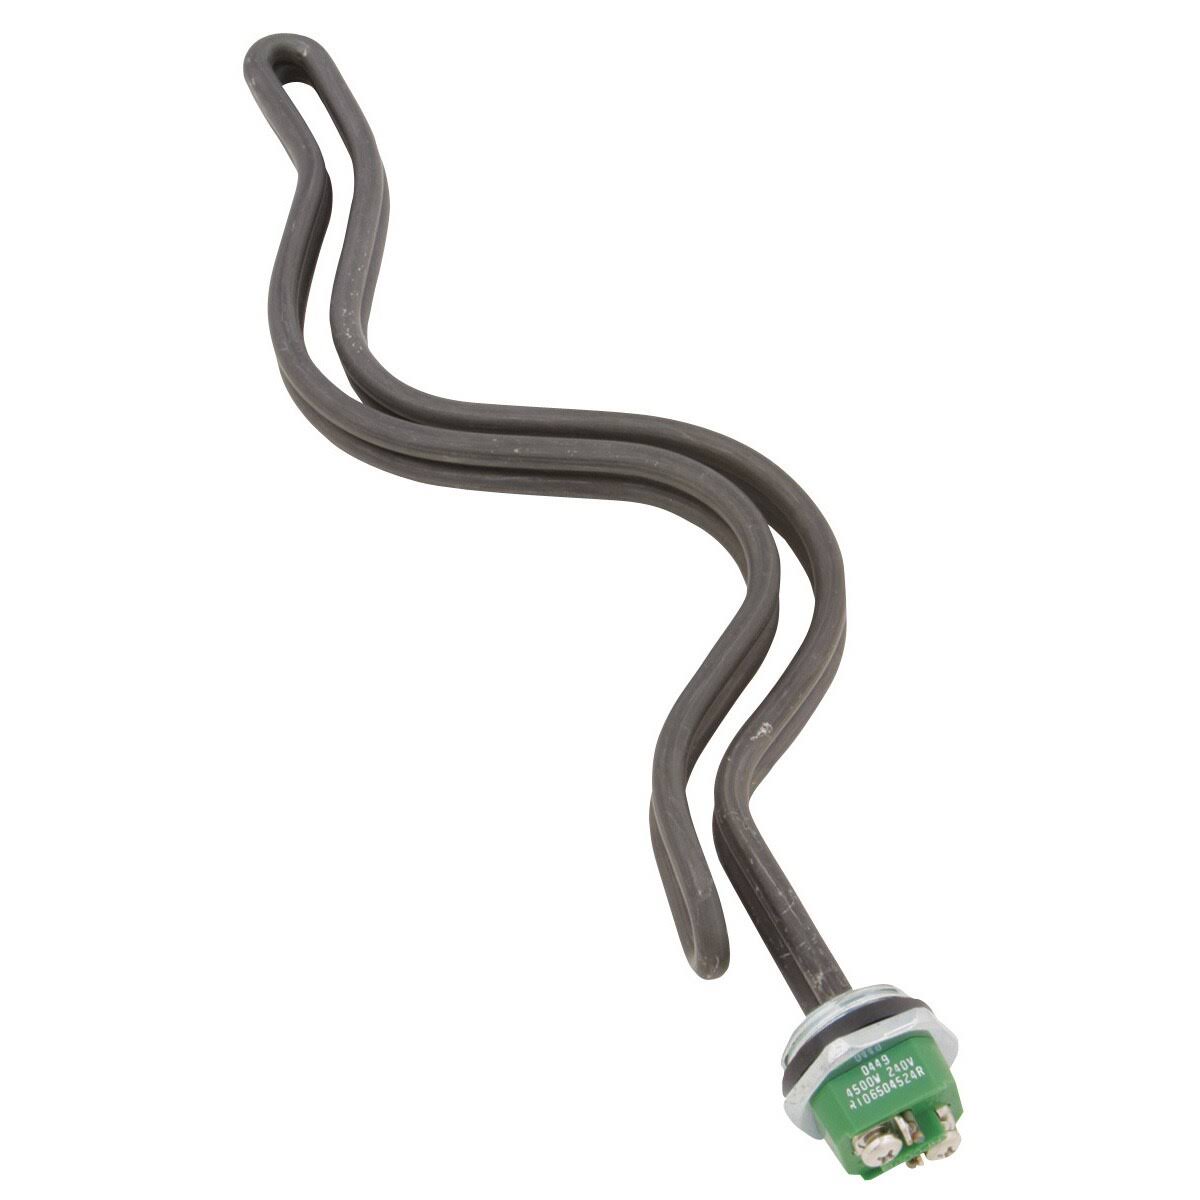 Reliance 5500 Water Heater Element - 240V, 1"x13.5"